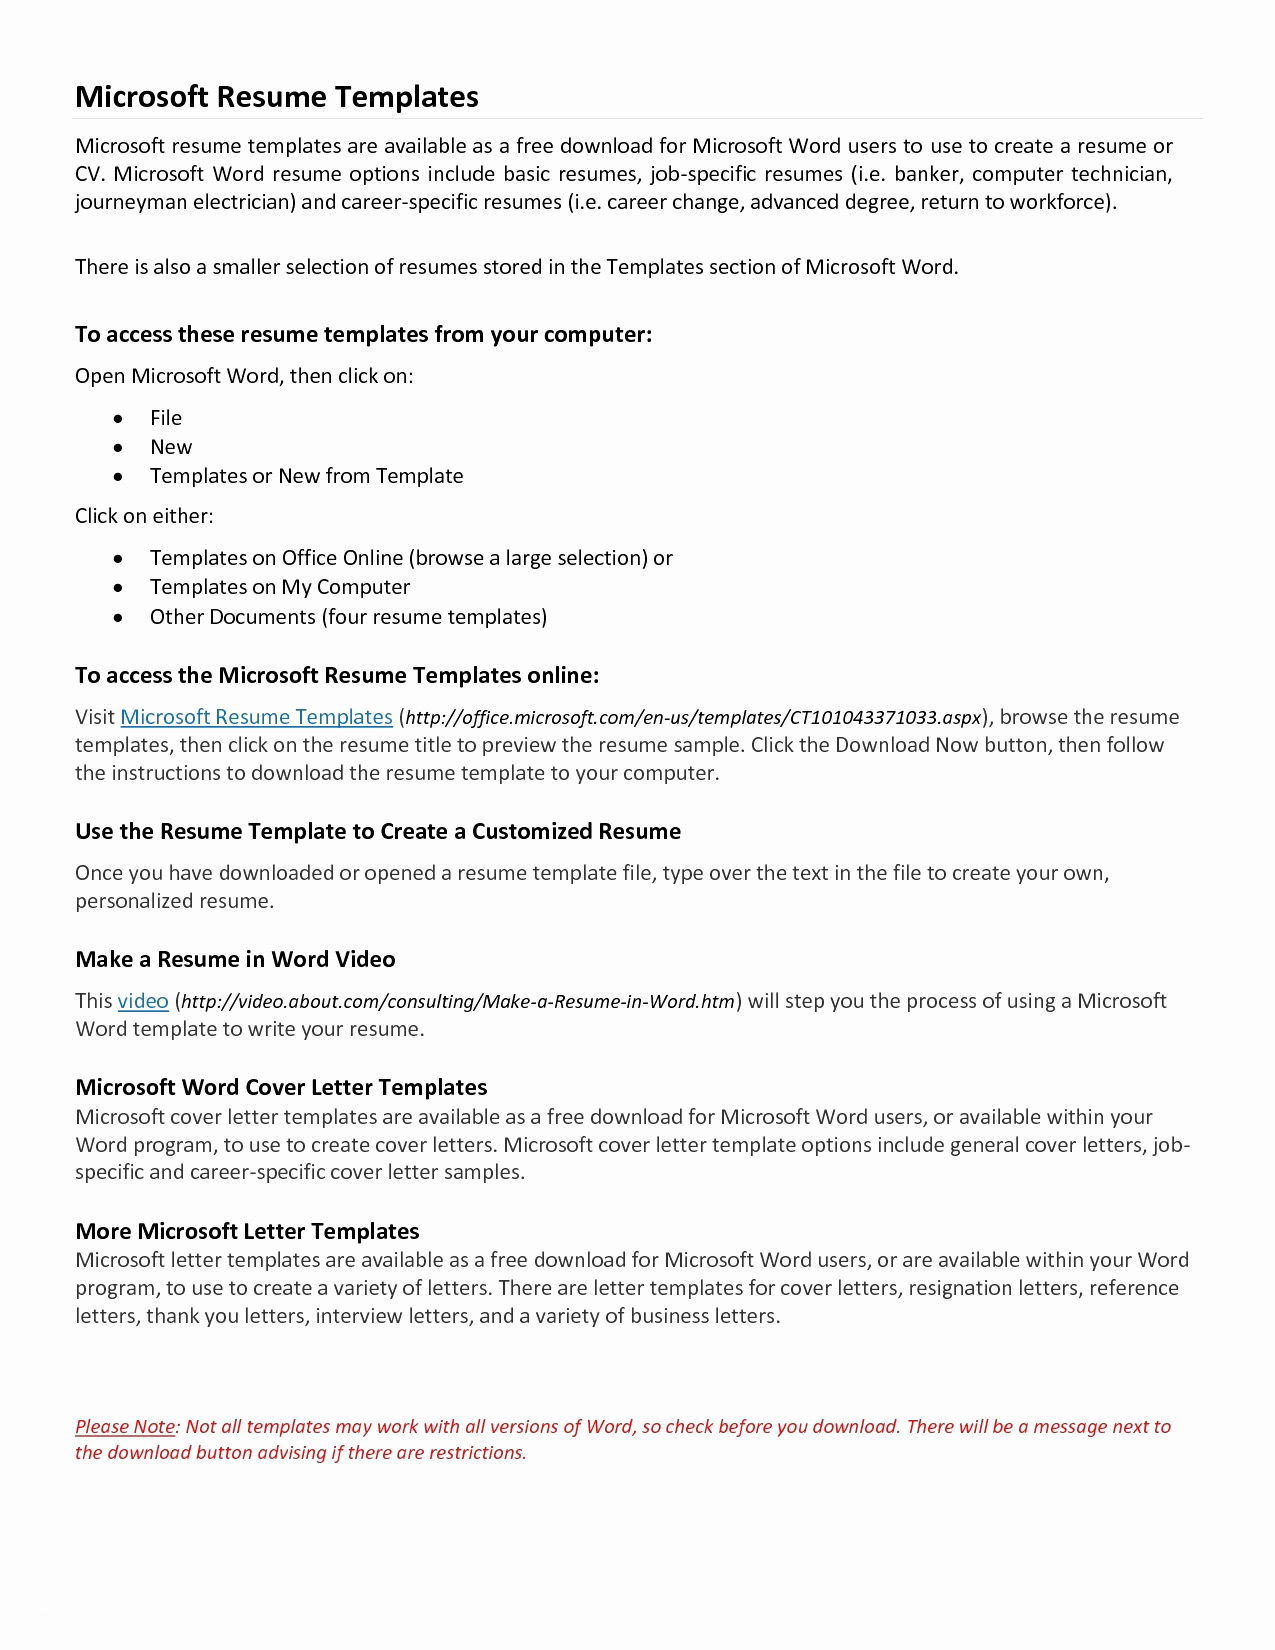 Free Reference Letter Template for Employment - Free Microsoft Resume Templates New Microsoft Word Resume Sample